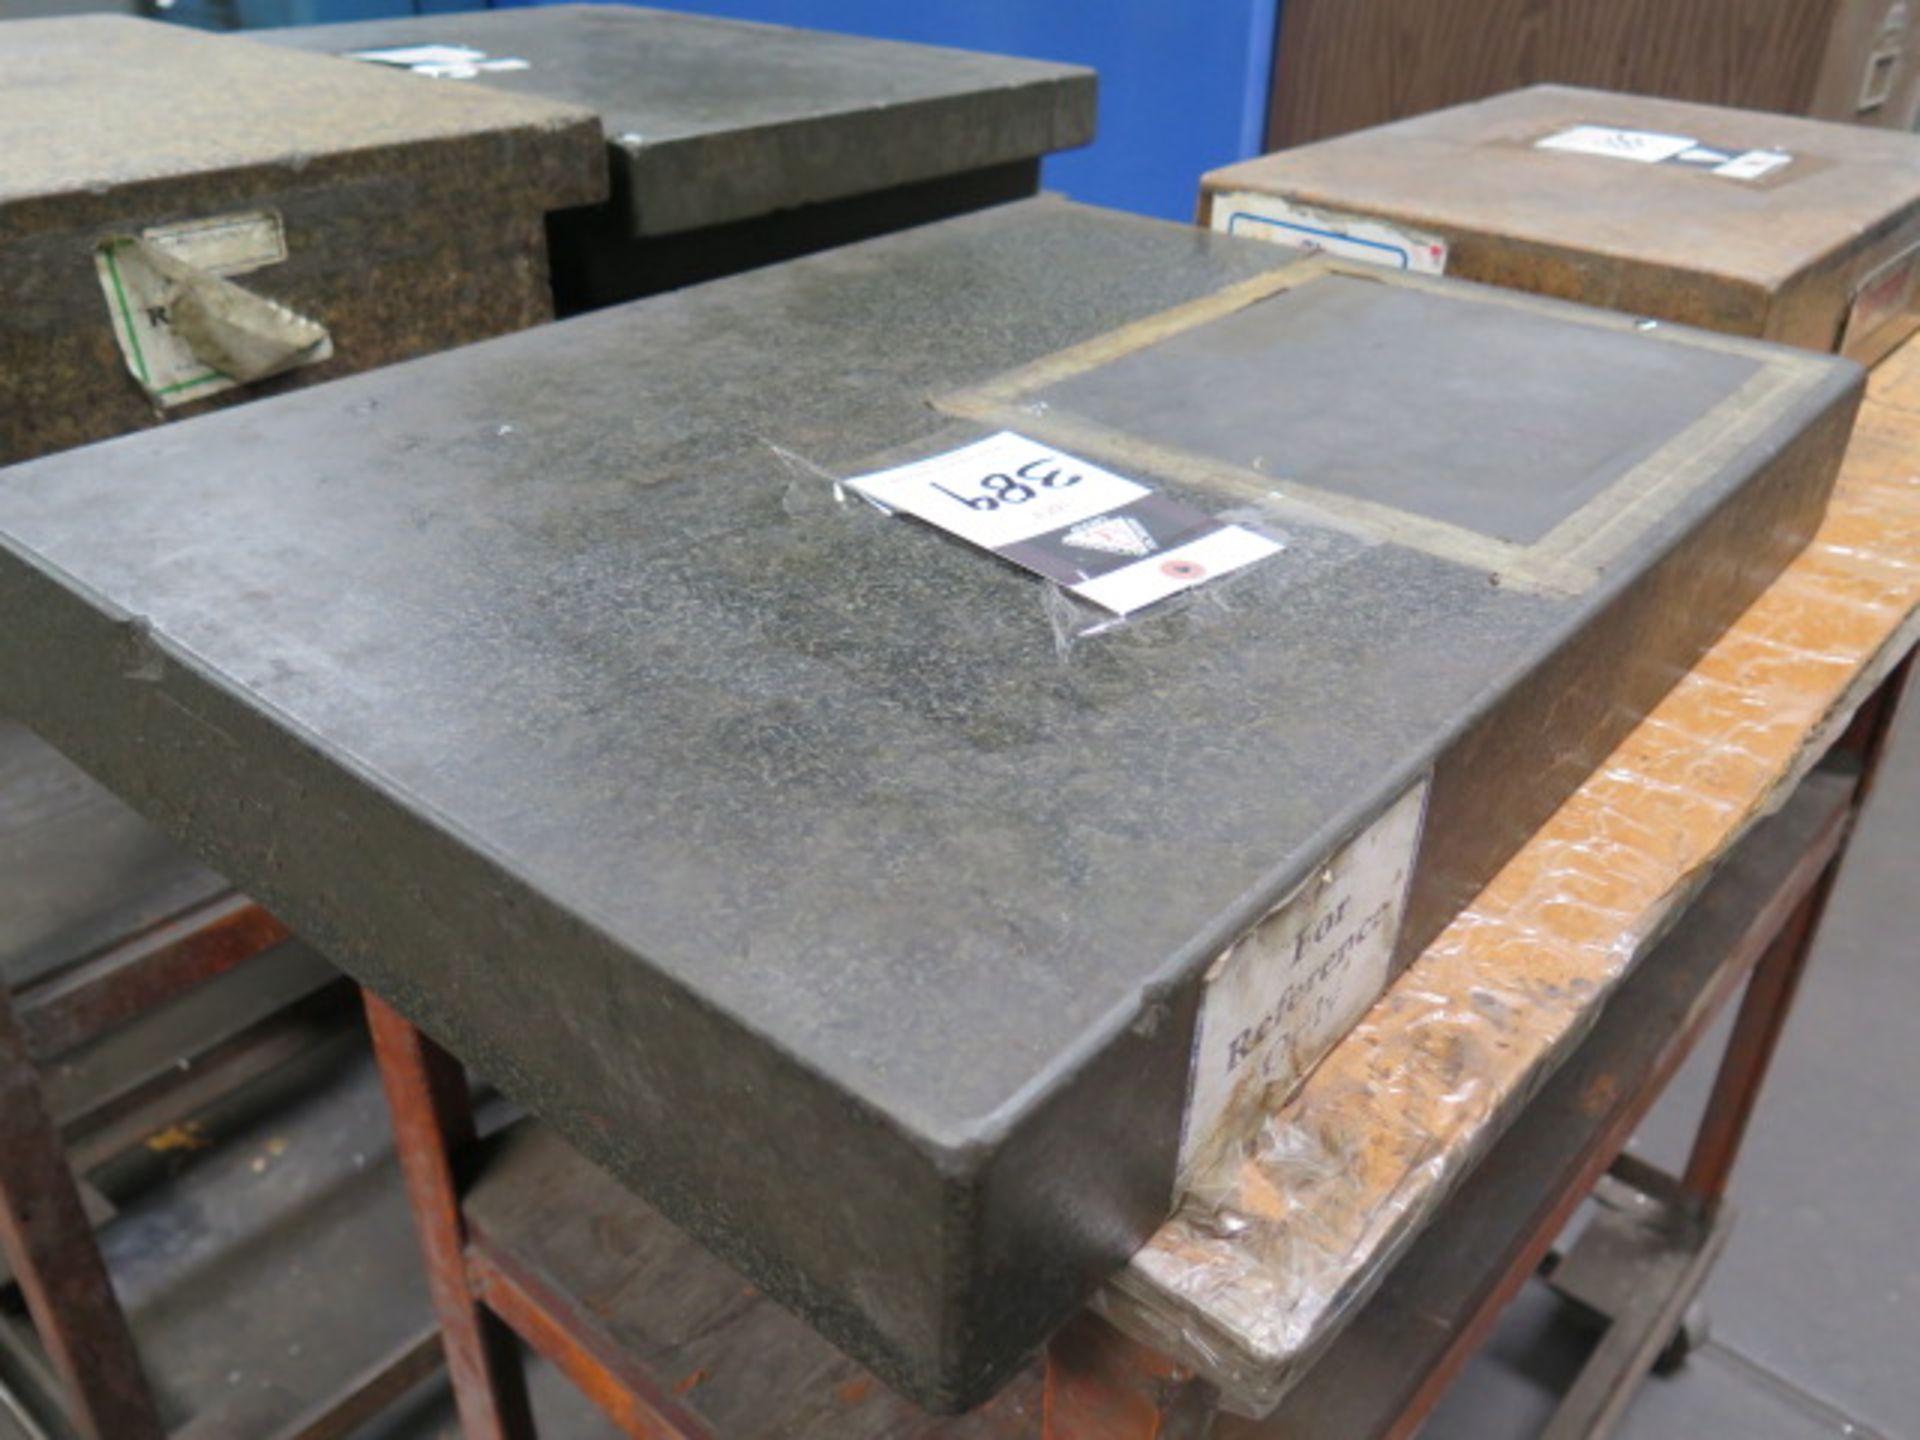 18" x 24" x 3" Granite Surface Plate w/ Rolling Stand (SOLD AS-IS - NO WARRANTY) - Image 4 of 5